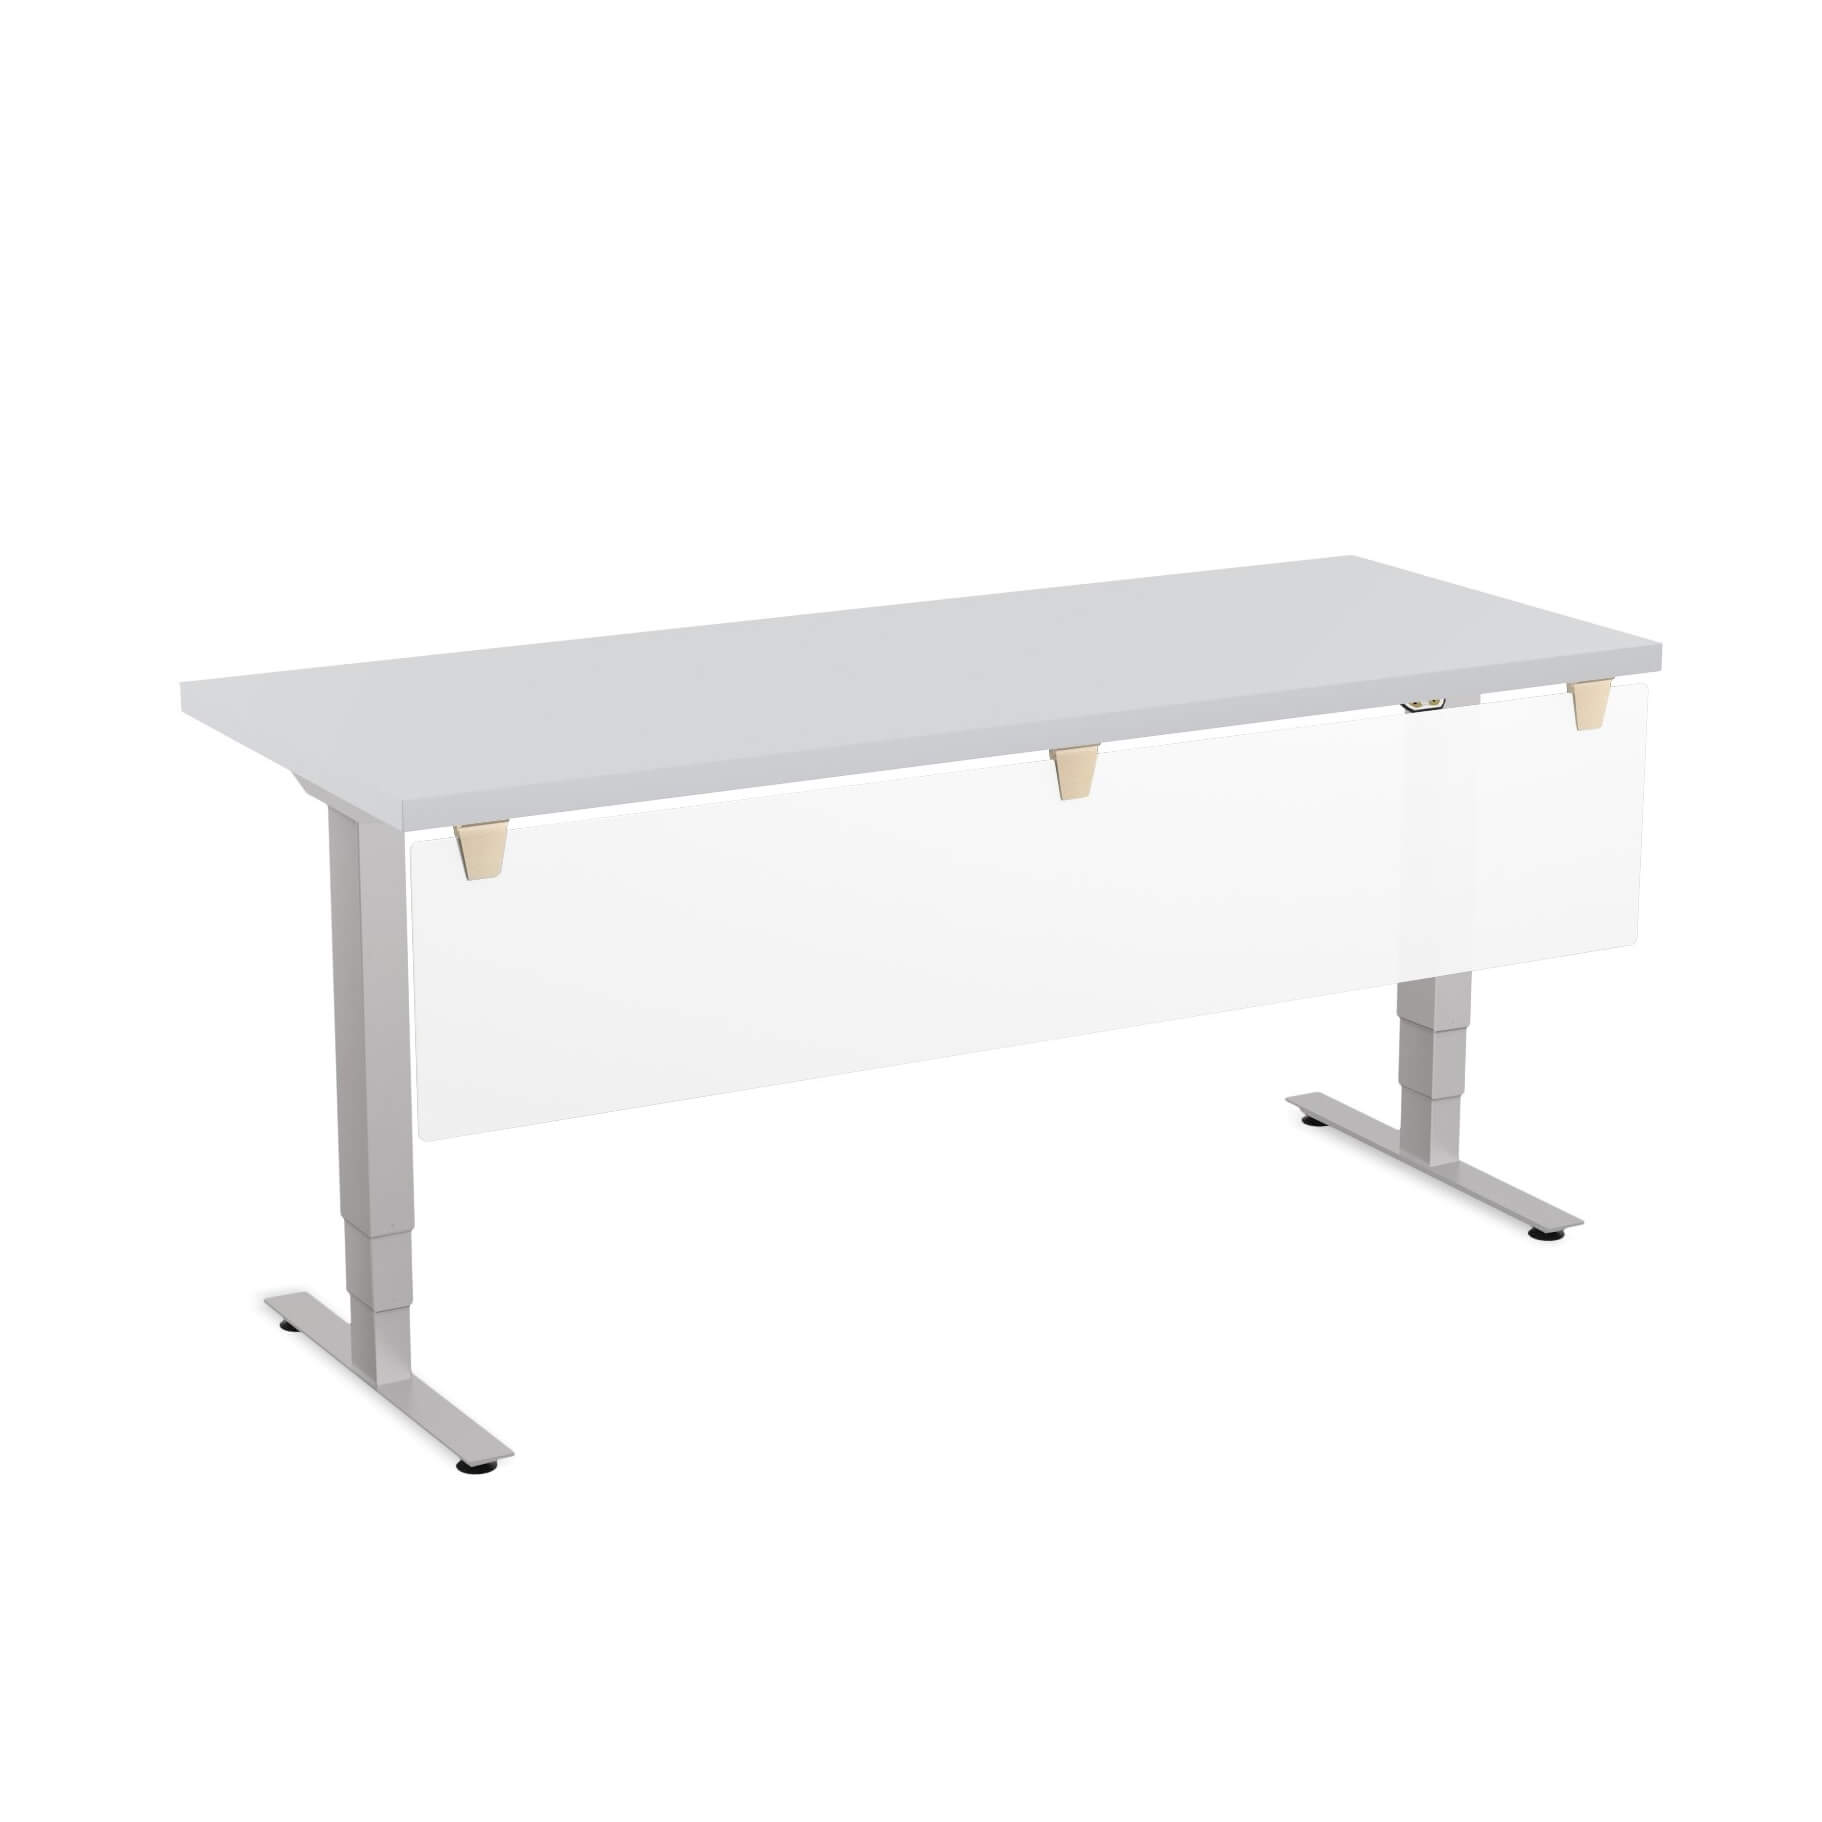 Sit stand desk height adjustable work table 1 2 3 4